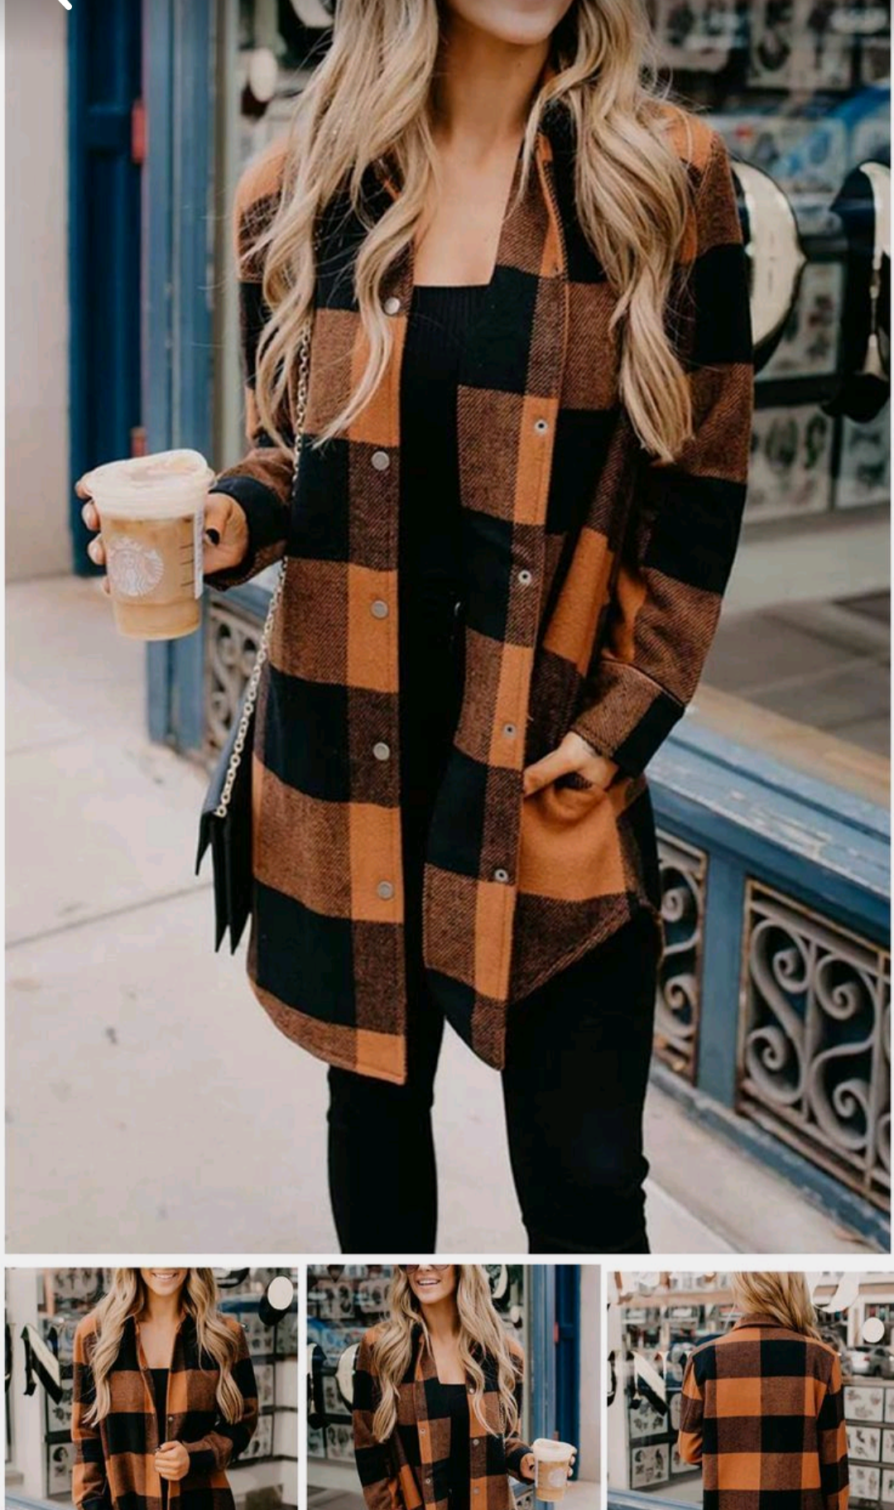 The Top 50 Fall Outfit Ideas For Women